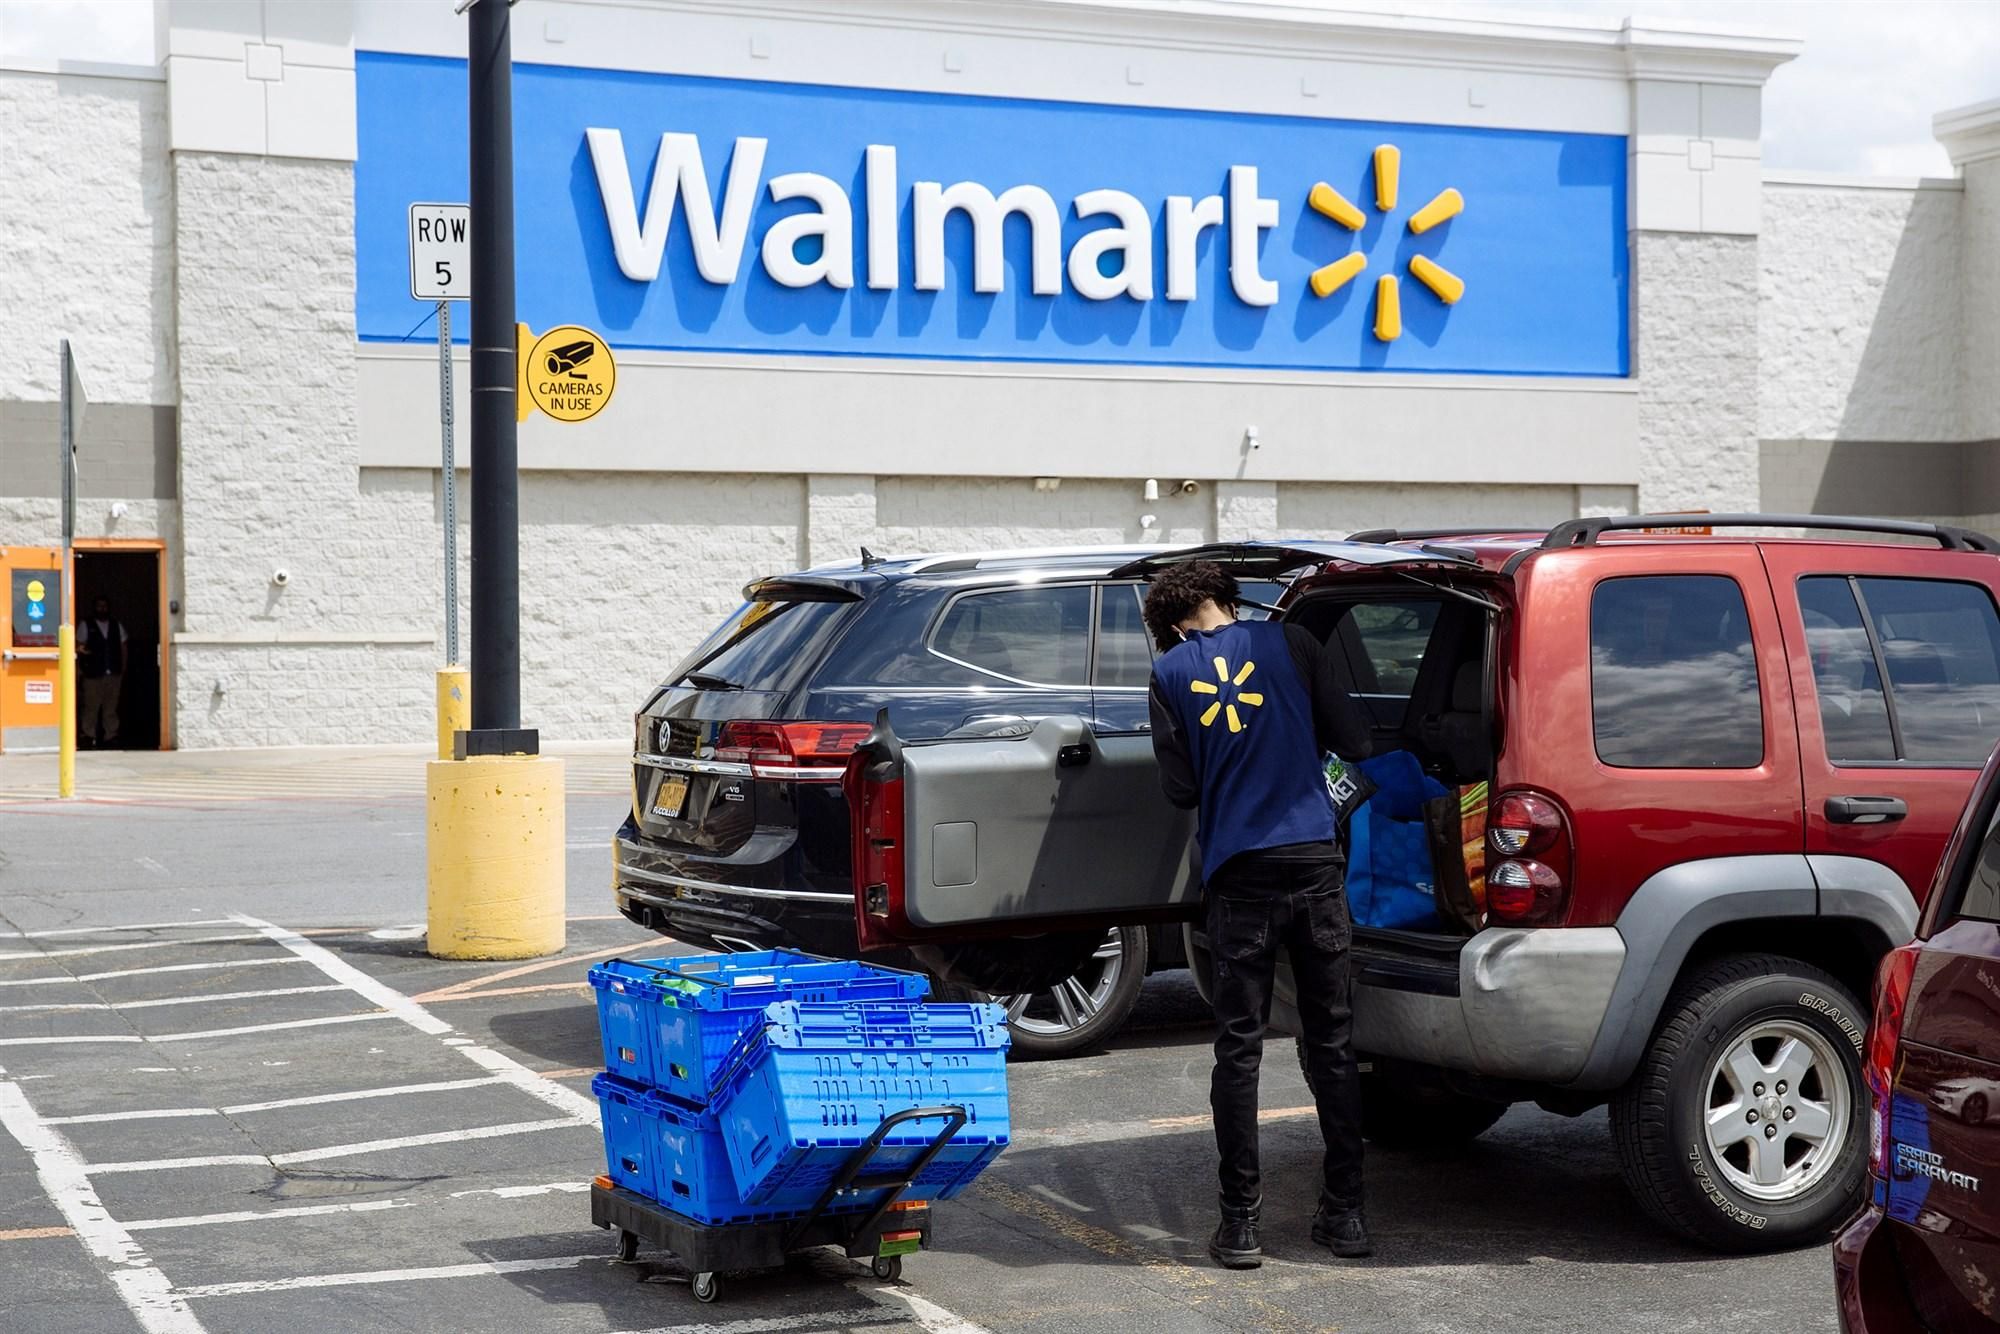 A worker delivers groceries to a customer's vehicle outside a Walmart store in Amsterdam, N.Y., on May 15. (Photo: Angus Mordant / Bloomberg via Getty Images file)